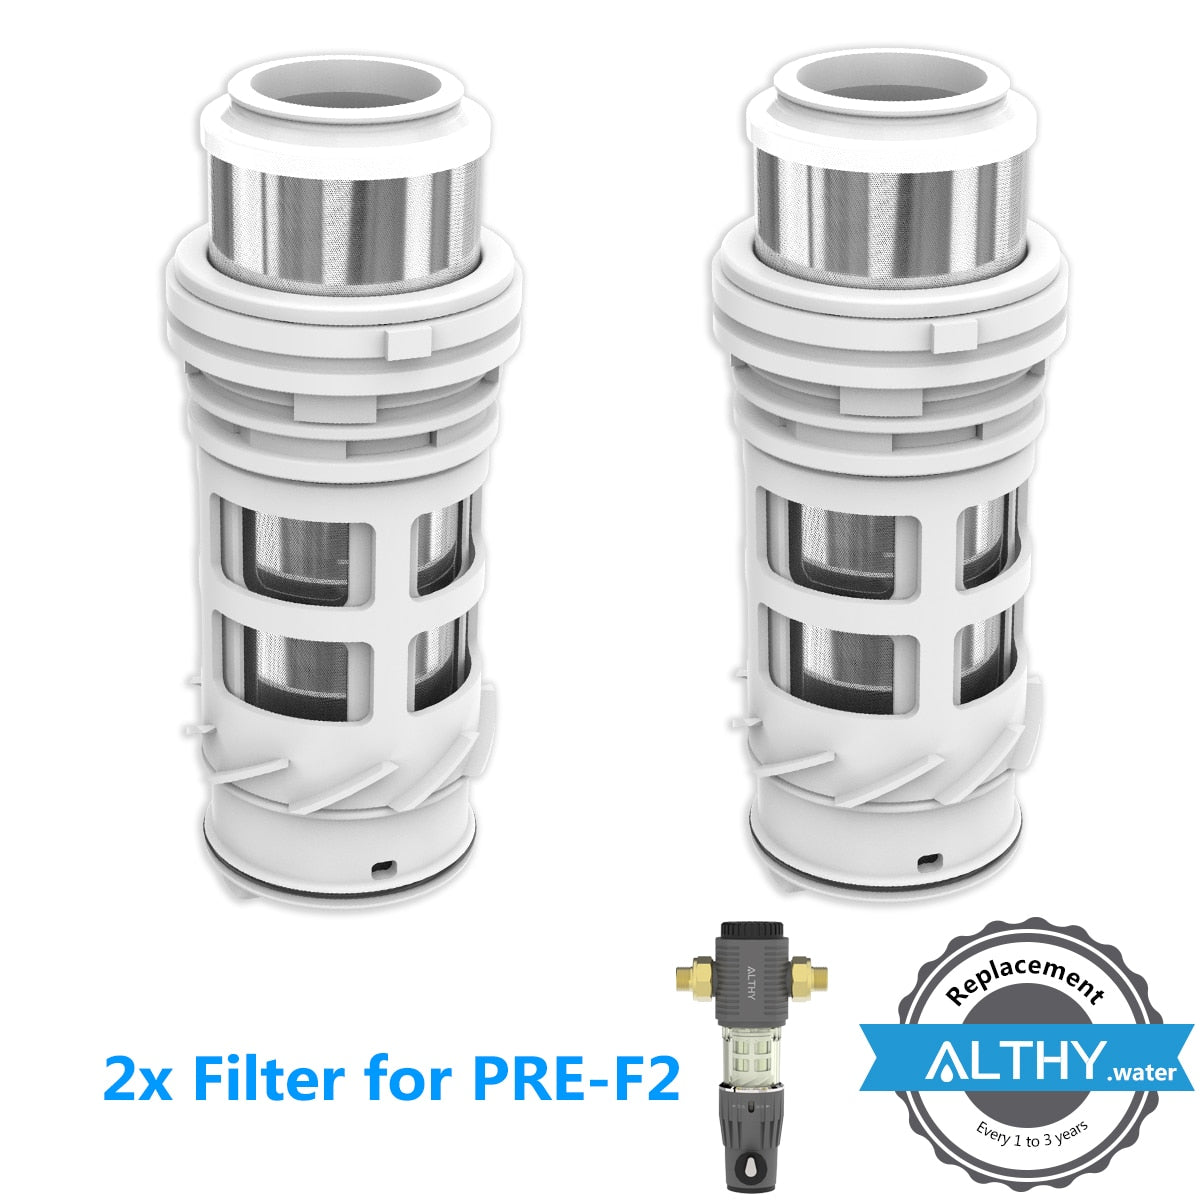 Backwash Water Filter Replacement For ALTHY PRE1 / PRE2 / PRE3 / PRE4 / AUTO2 Central Prefilter System Stainless Steel Mesh 2xfilterforPRE-F2China Hardware > Plumbing > Water Dispensing & Filtration 101.99 EZYSELLA SHOP